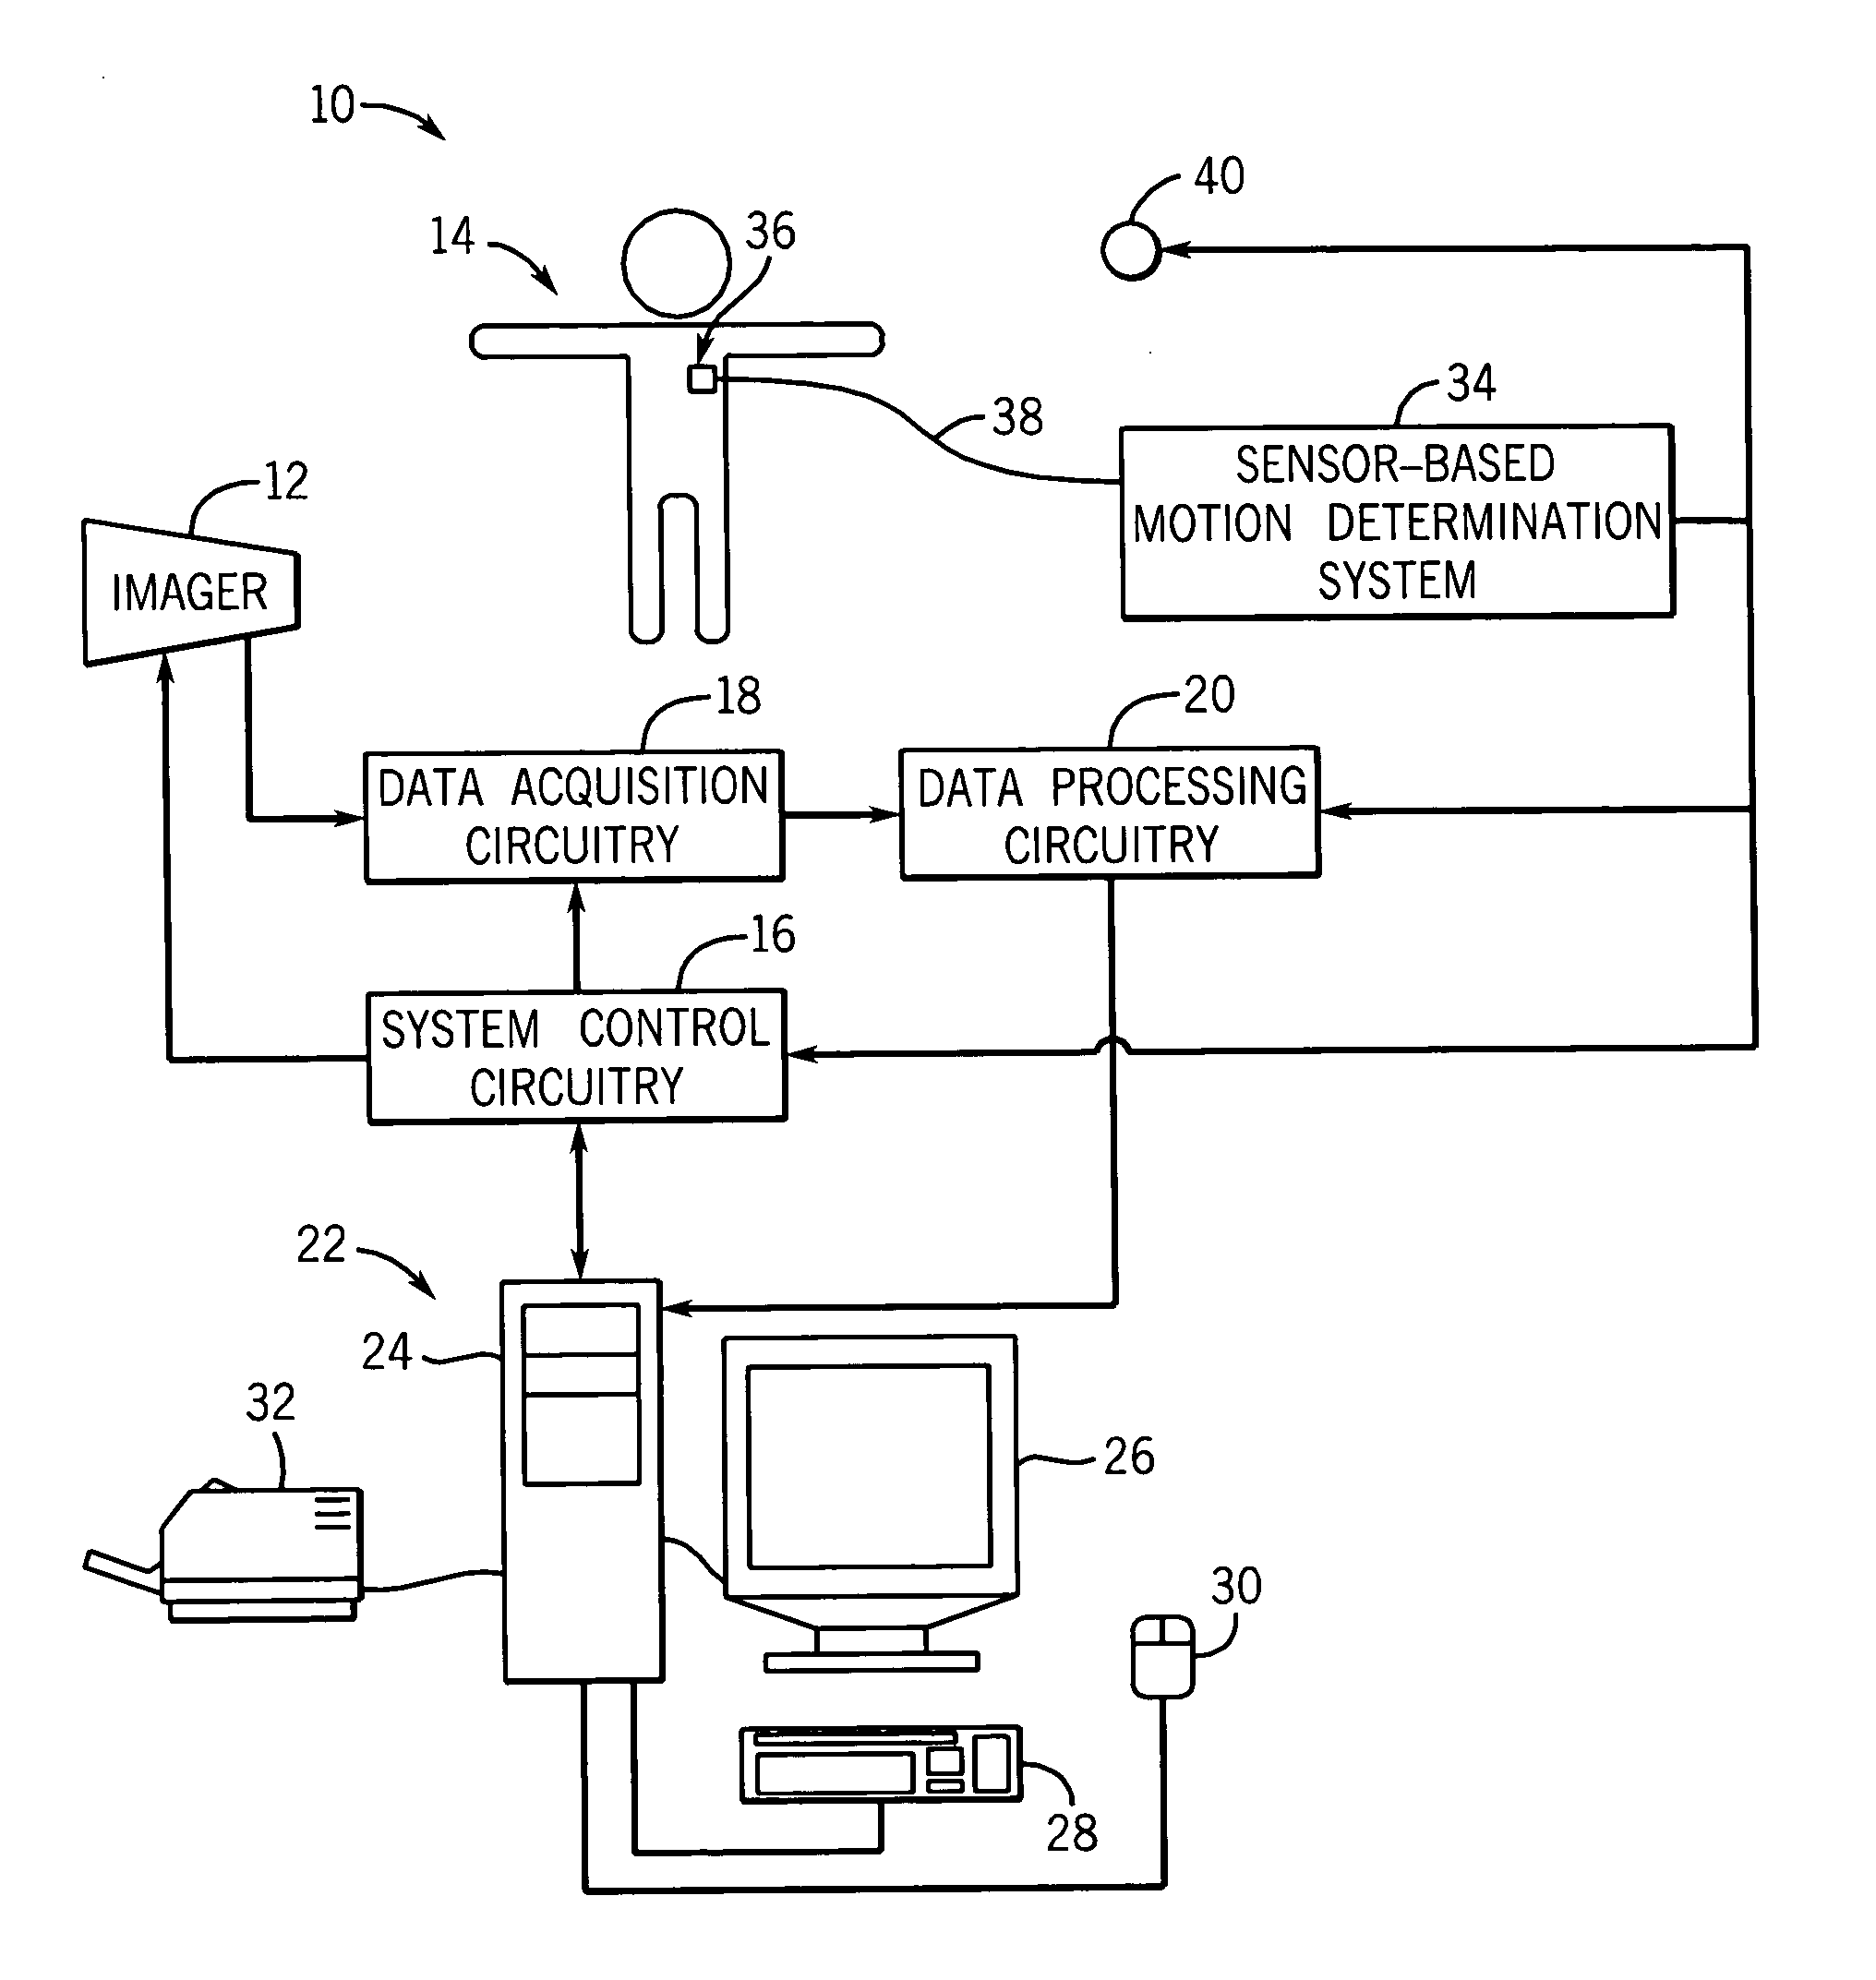 Method and system to reduce motion-related image artifacts during breath holding